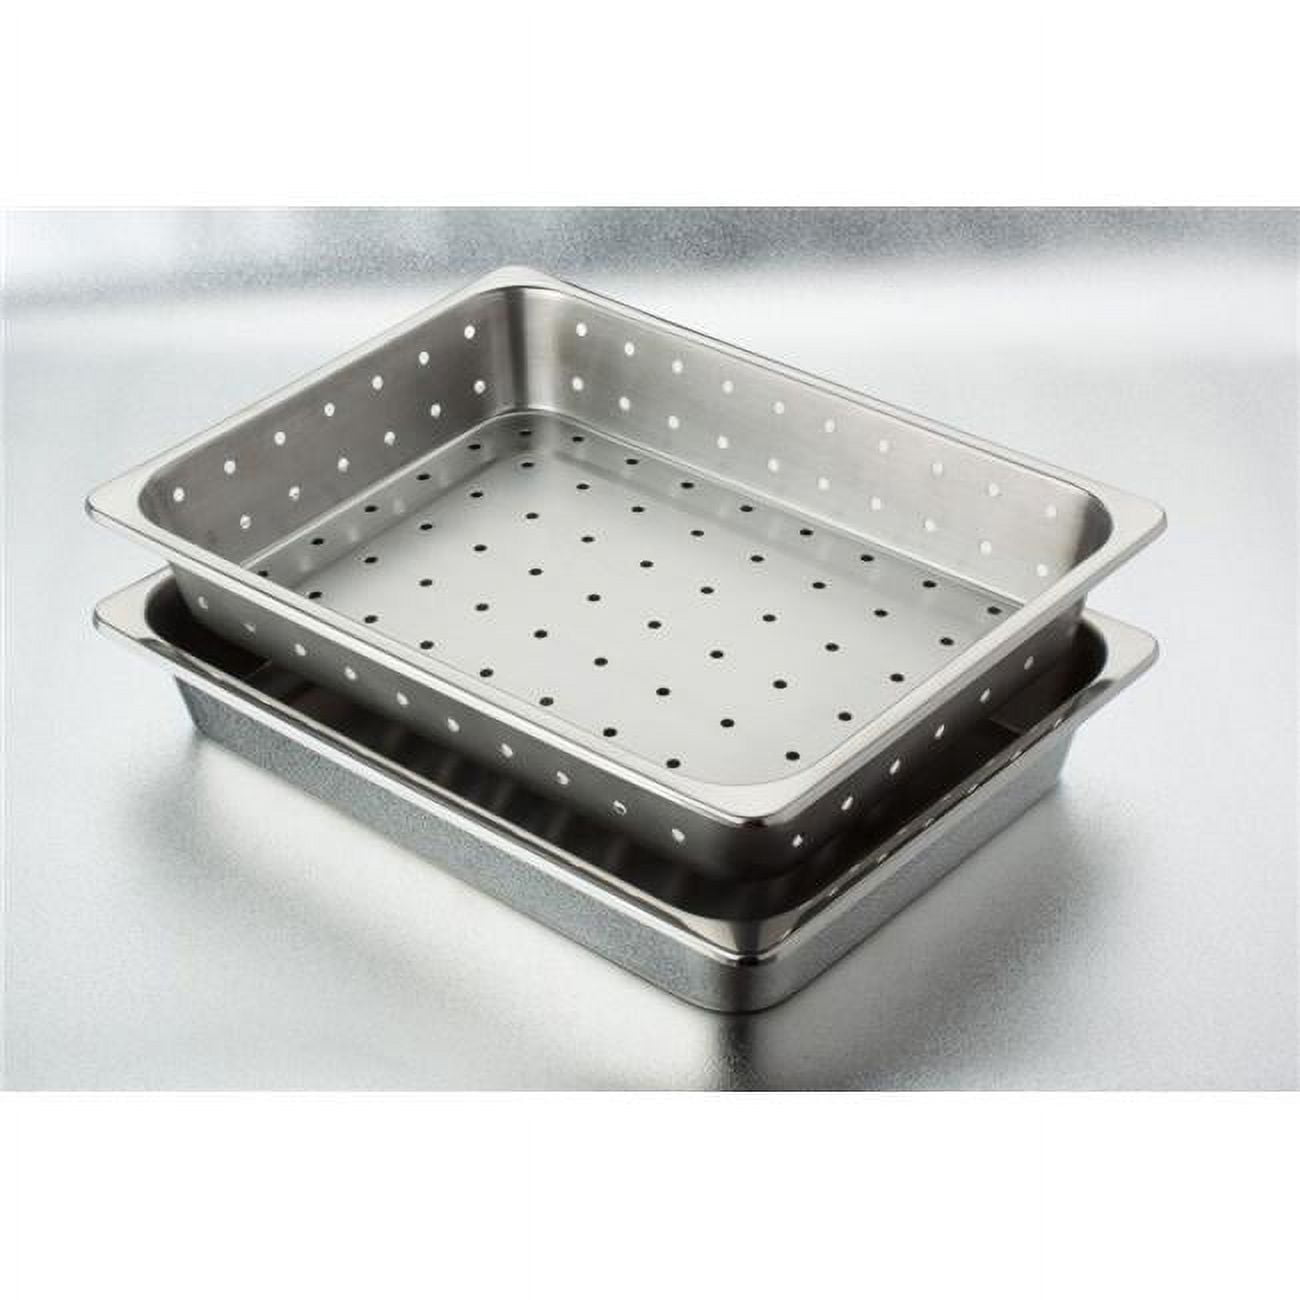 4273p Stainless Steel Perforated Insert Tray